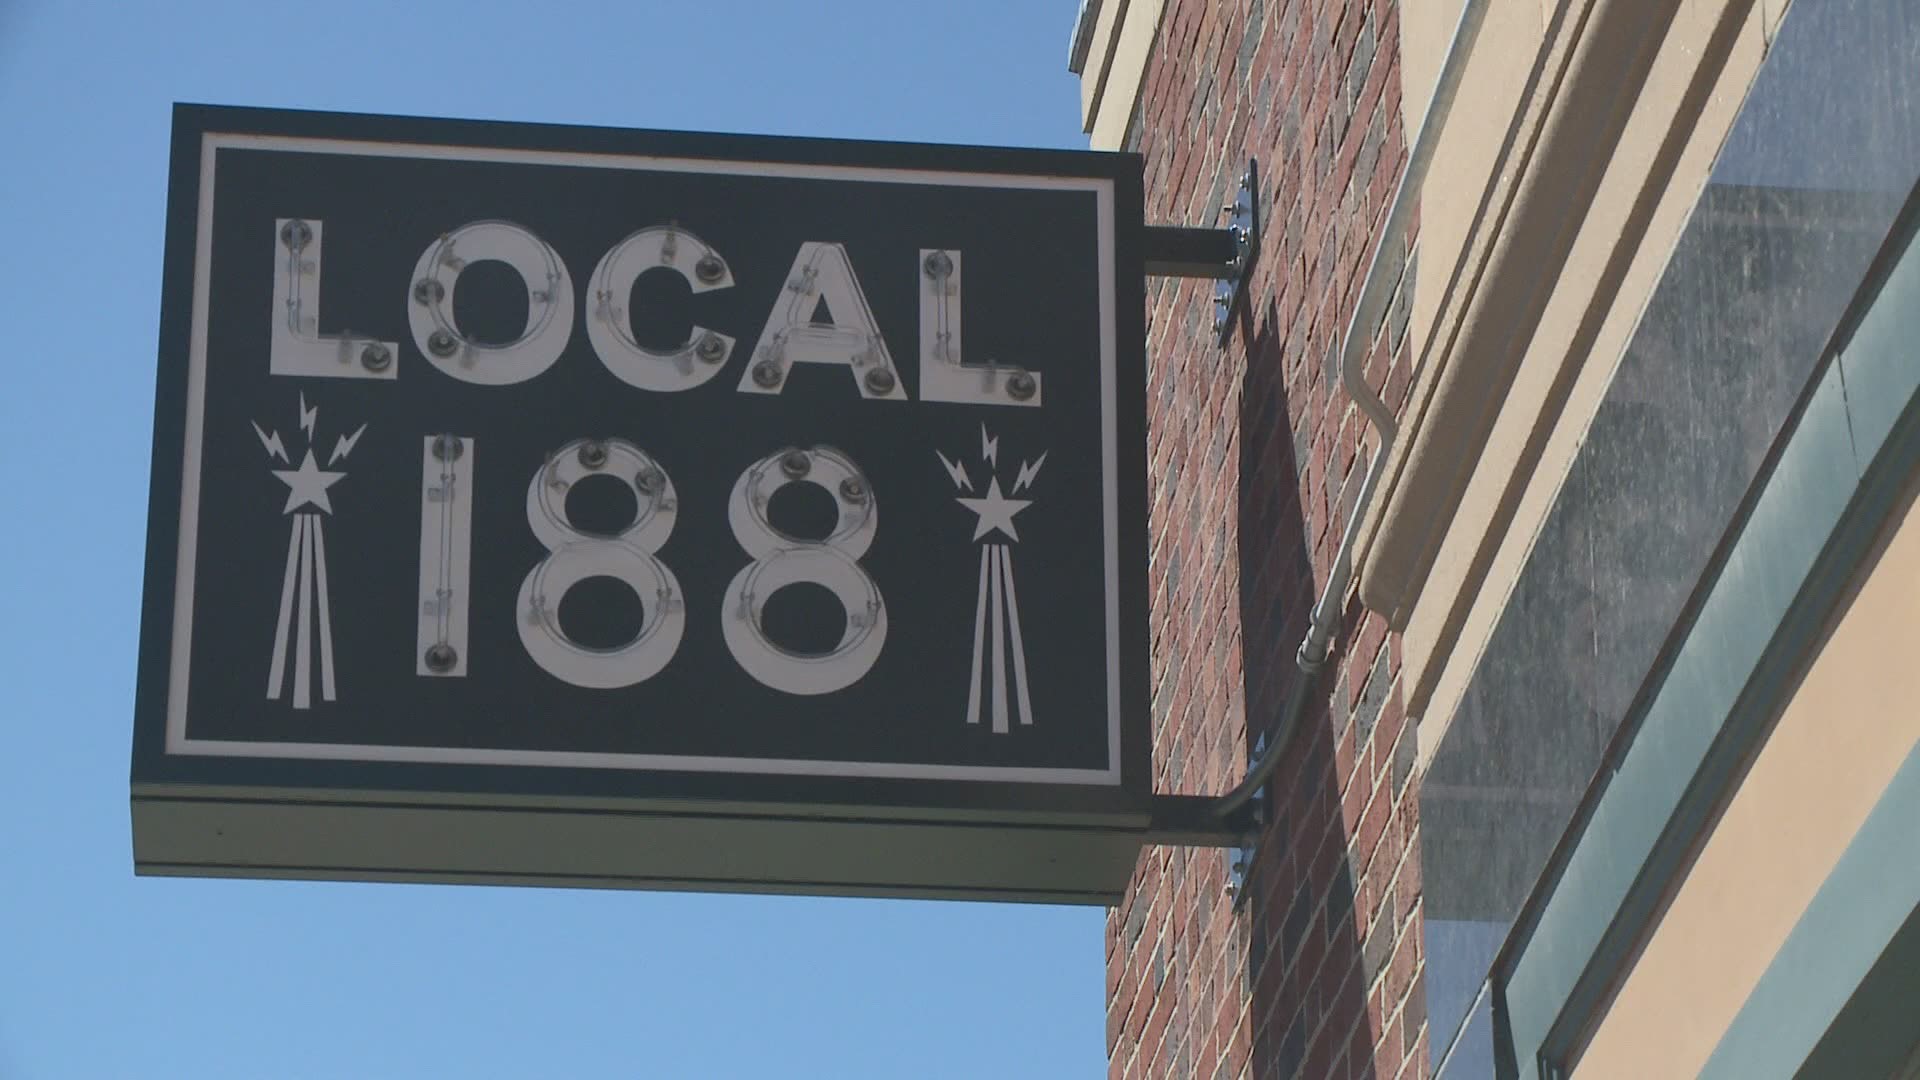 Local 188 is now selling more than food & drinks to survive during Covid-19.